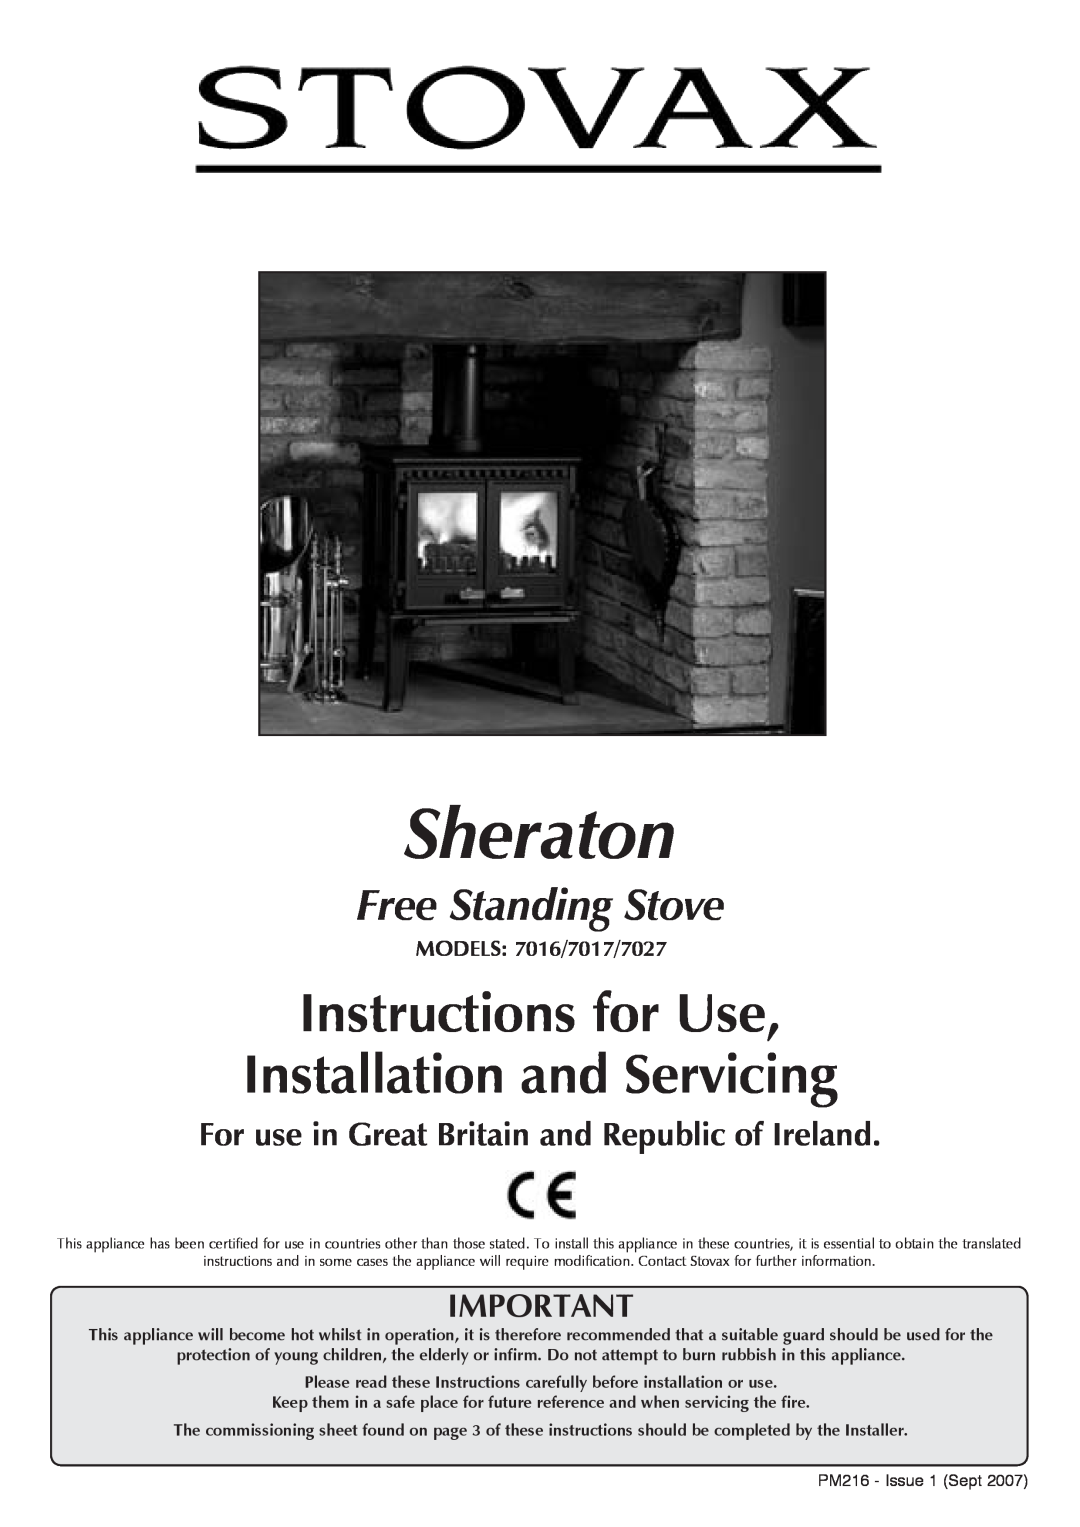 Stovax manual ModelS 7016/7017/7027, Sheraton, Instructions for Use Installation and Servicing, Free Standing Stove 